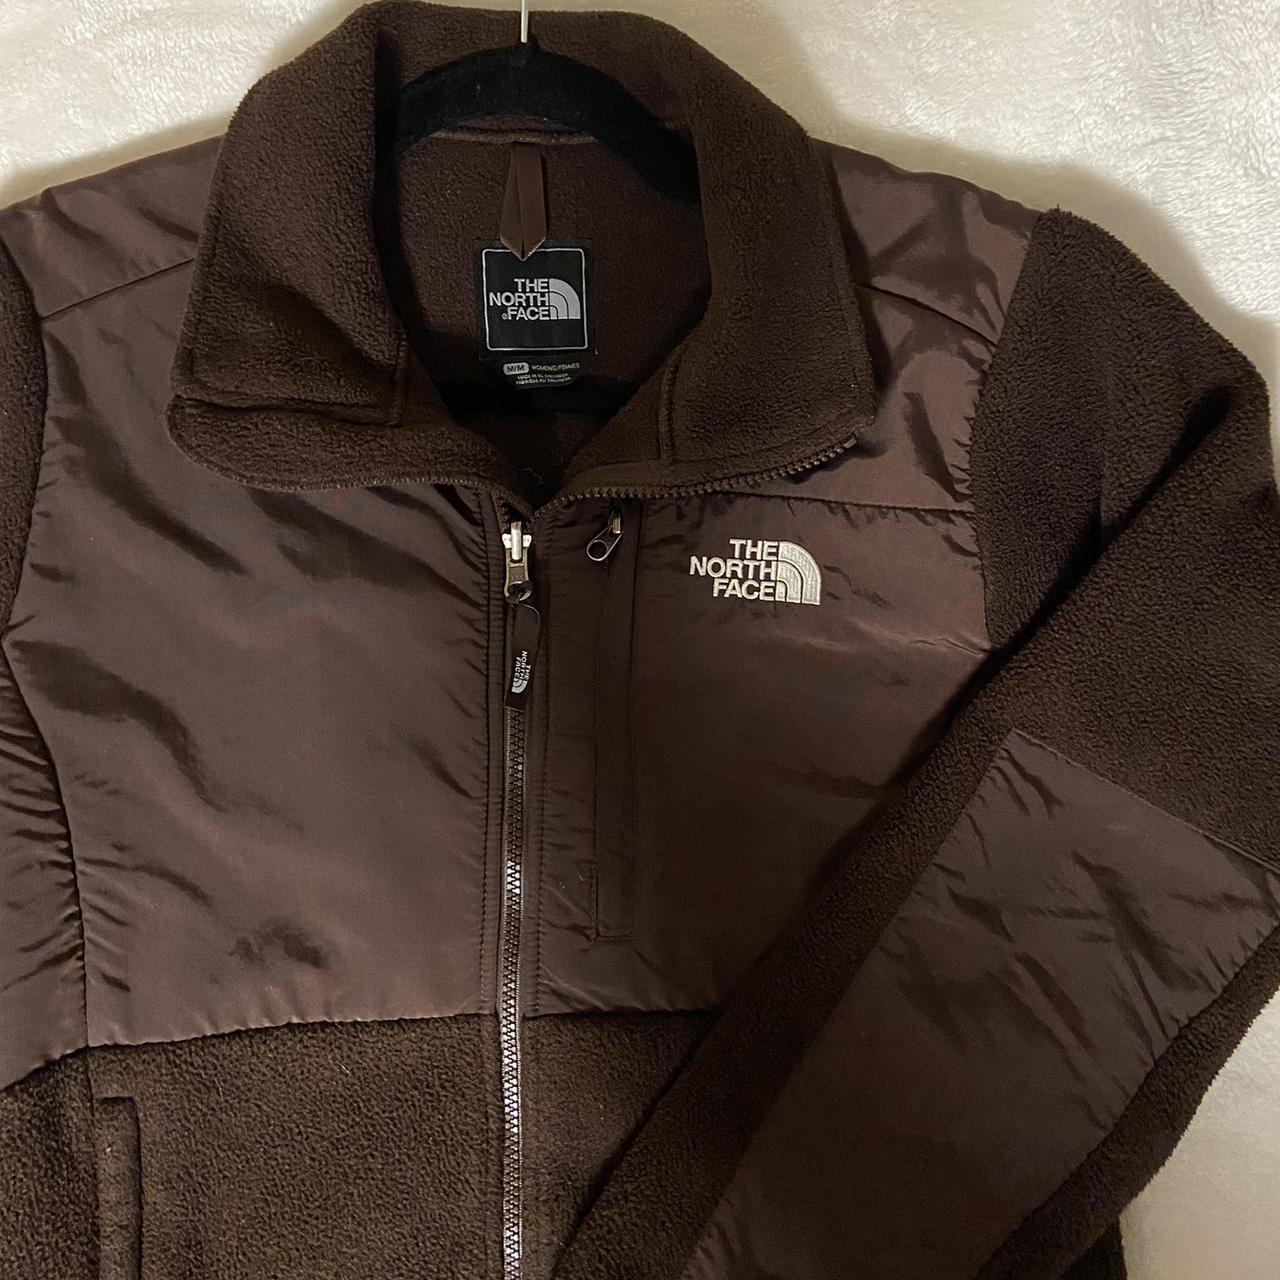 The North Face Women's Brown Jacket | Depop